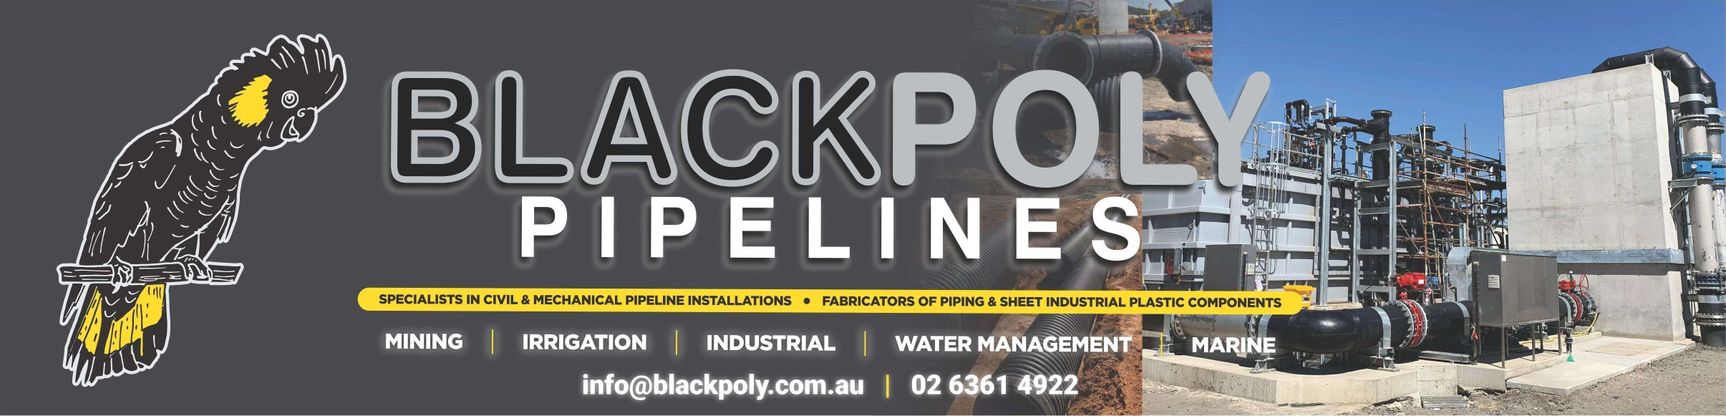 Blackpoly Pipelines featured image